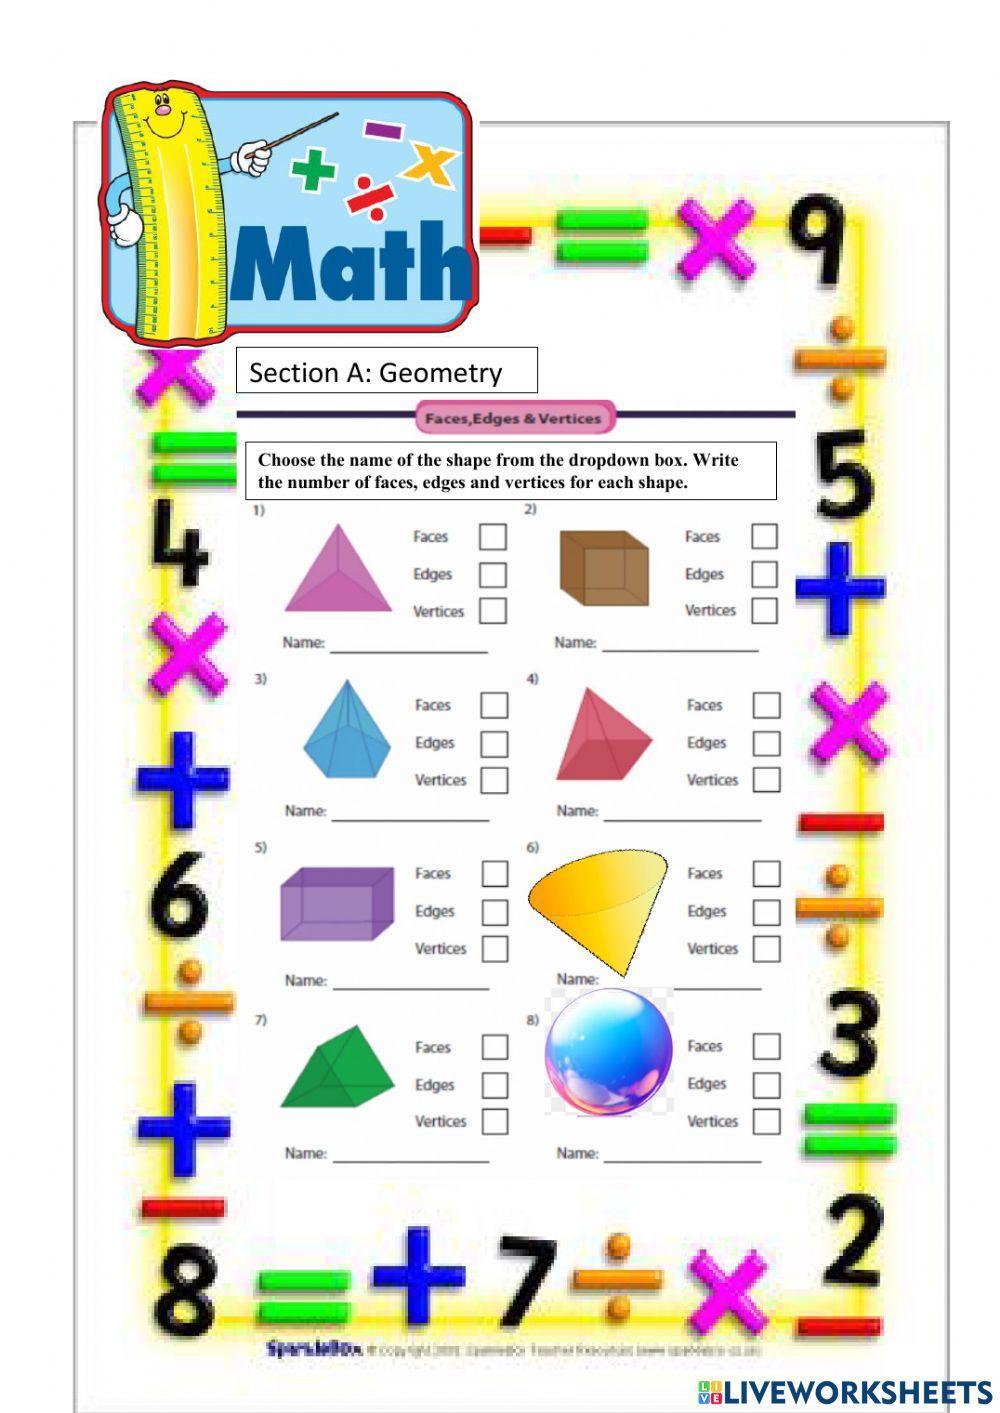 Geometry and multiplication